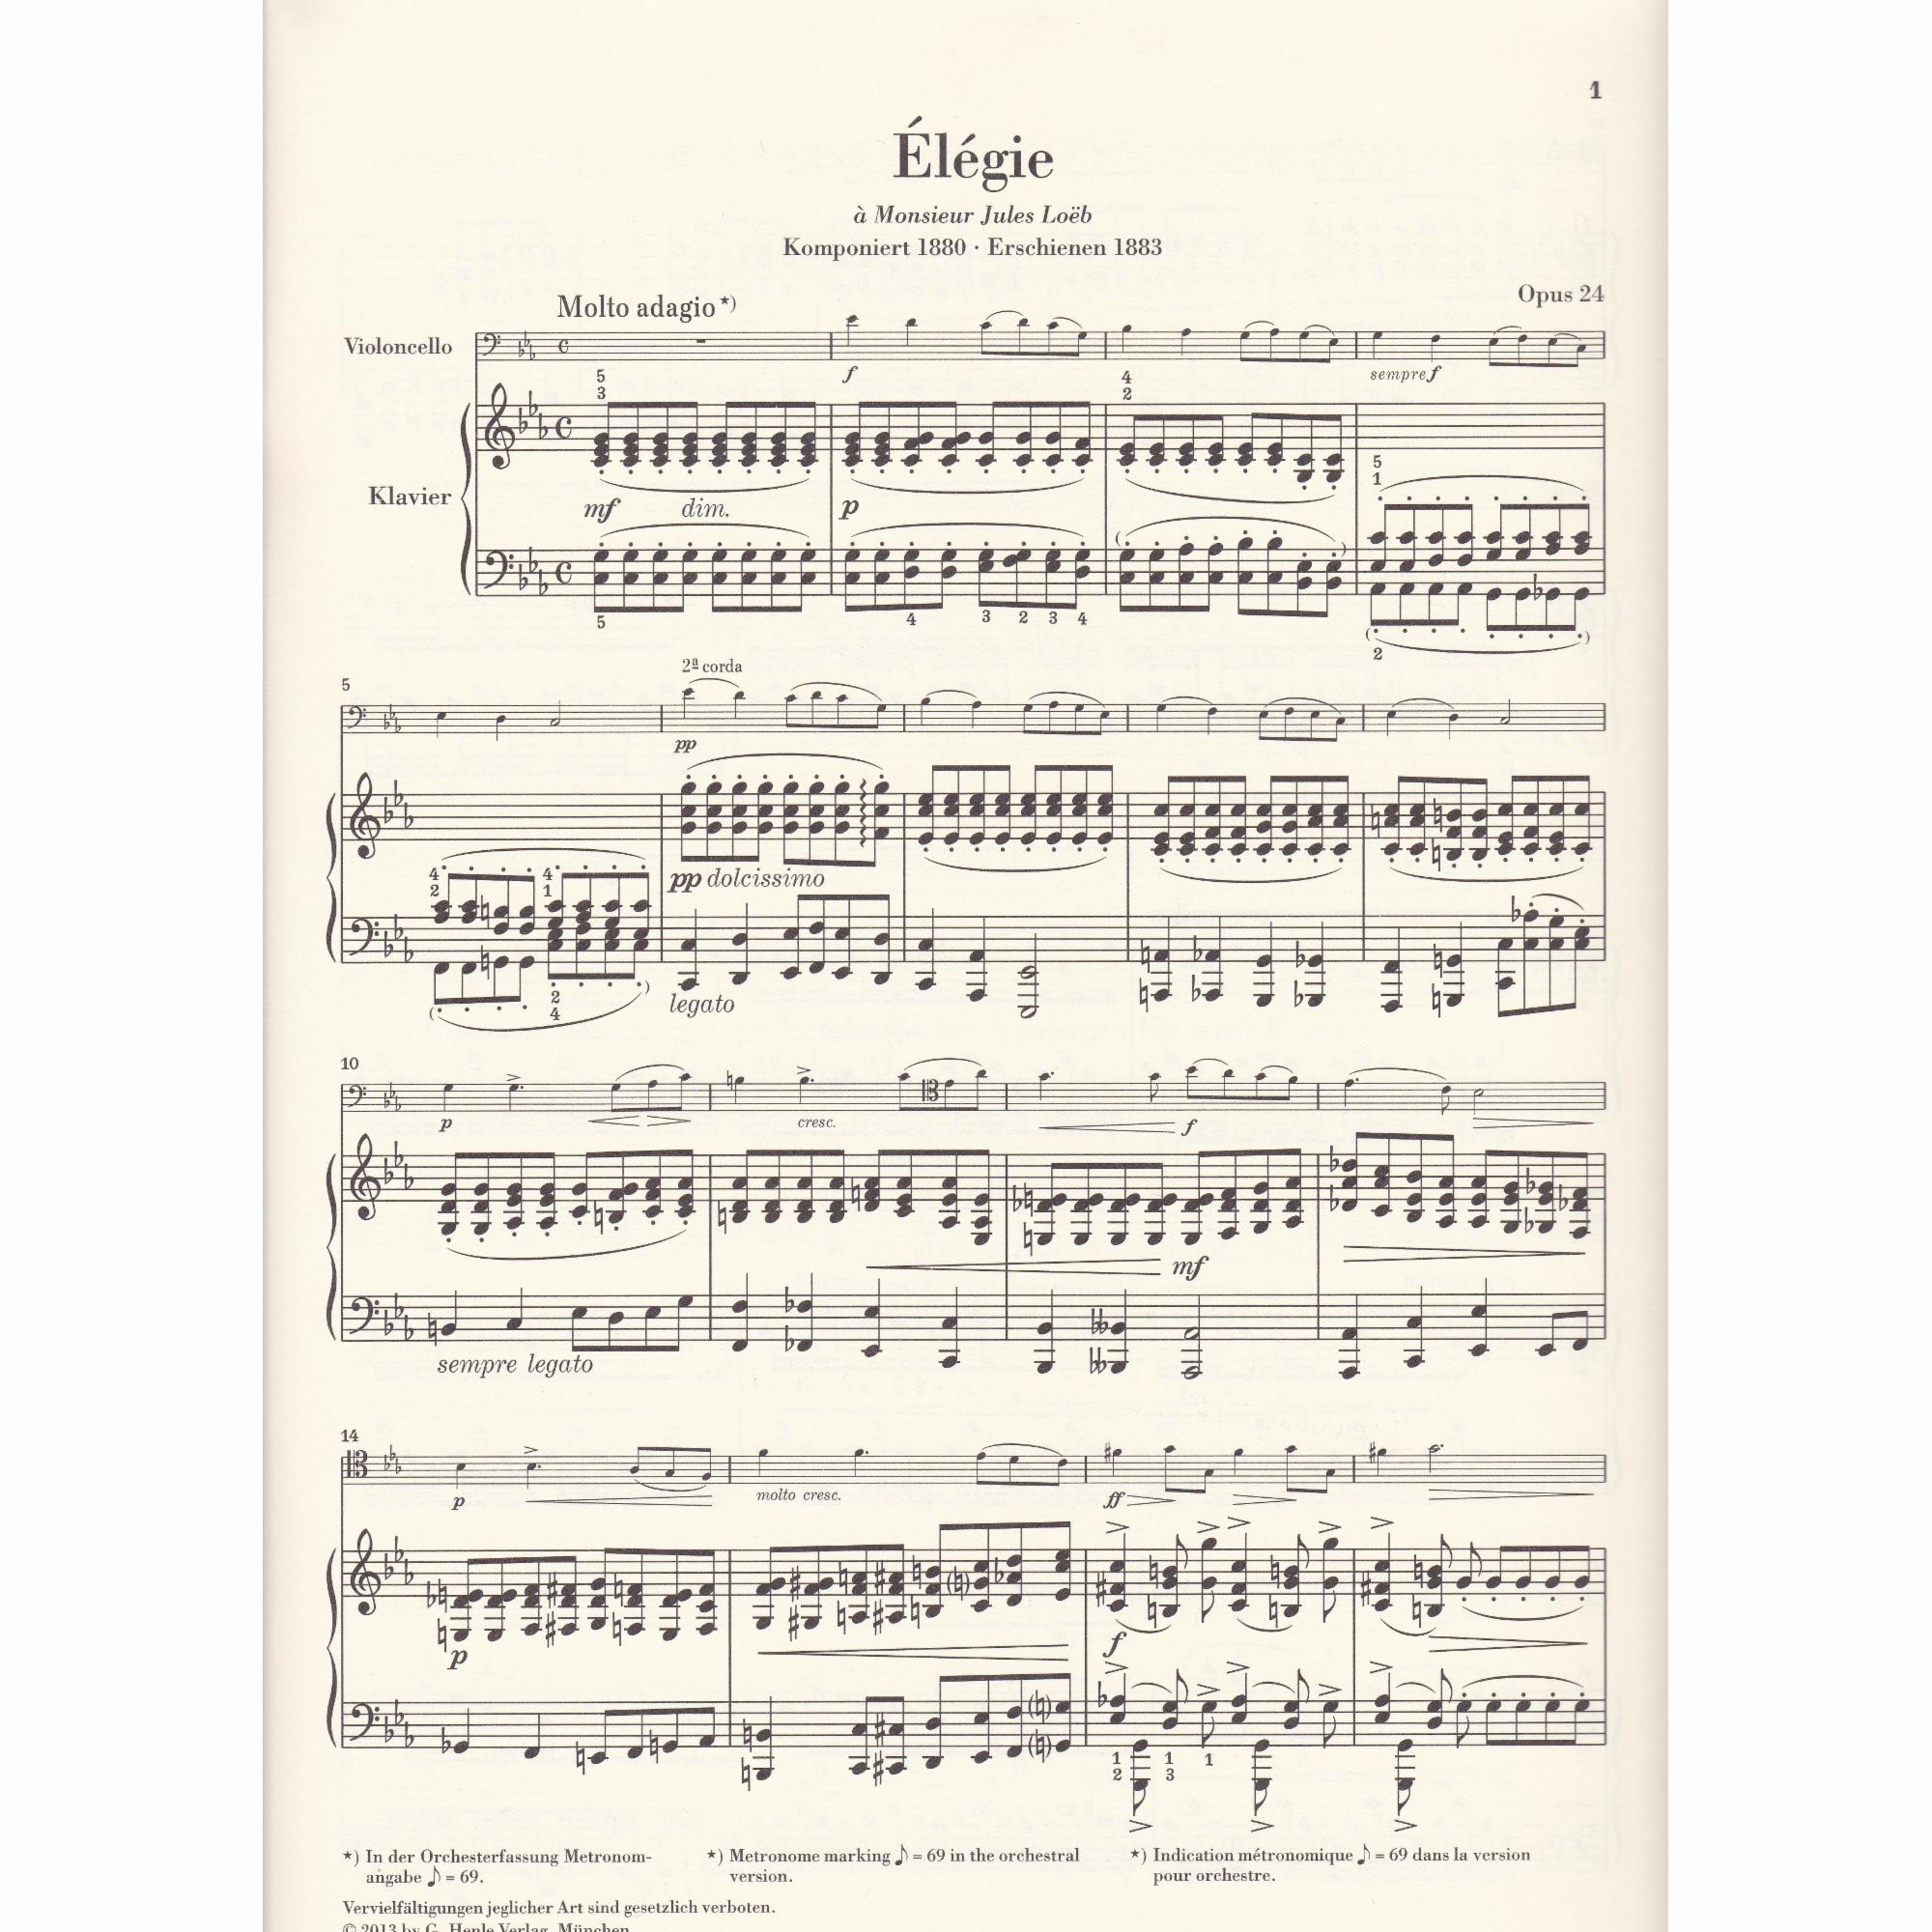 Elegie for Cello and Piano, Op. 24